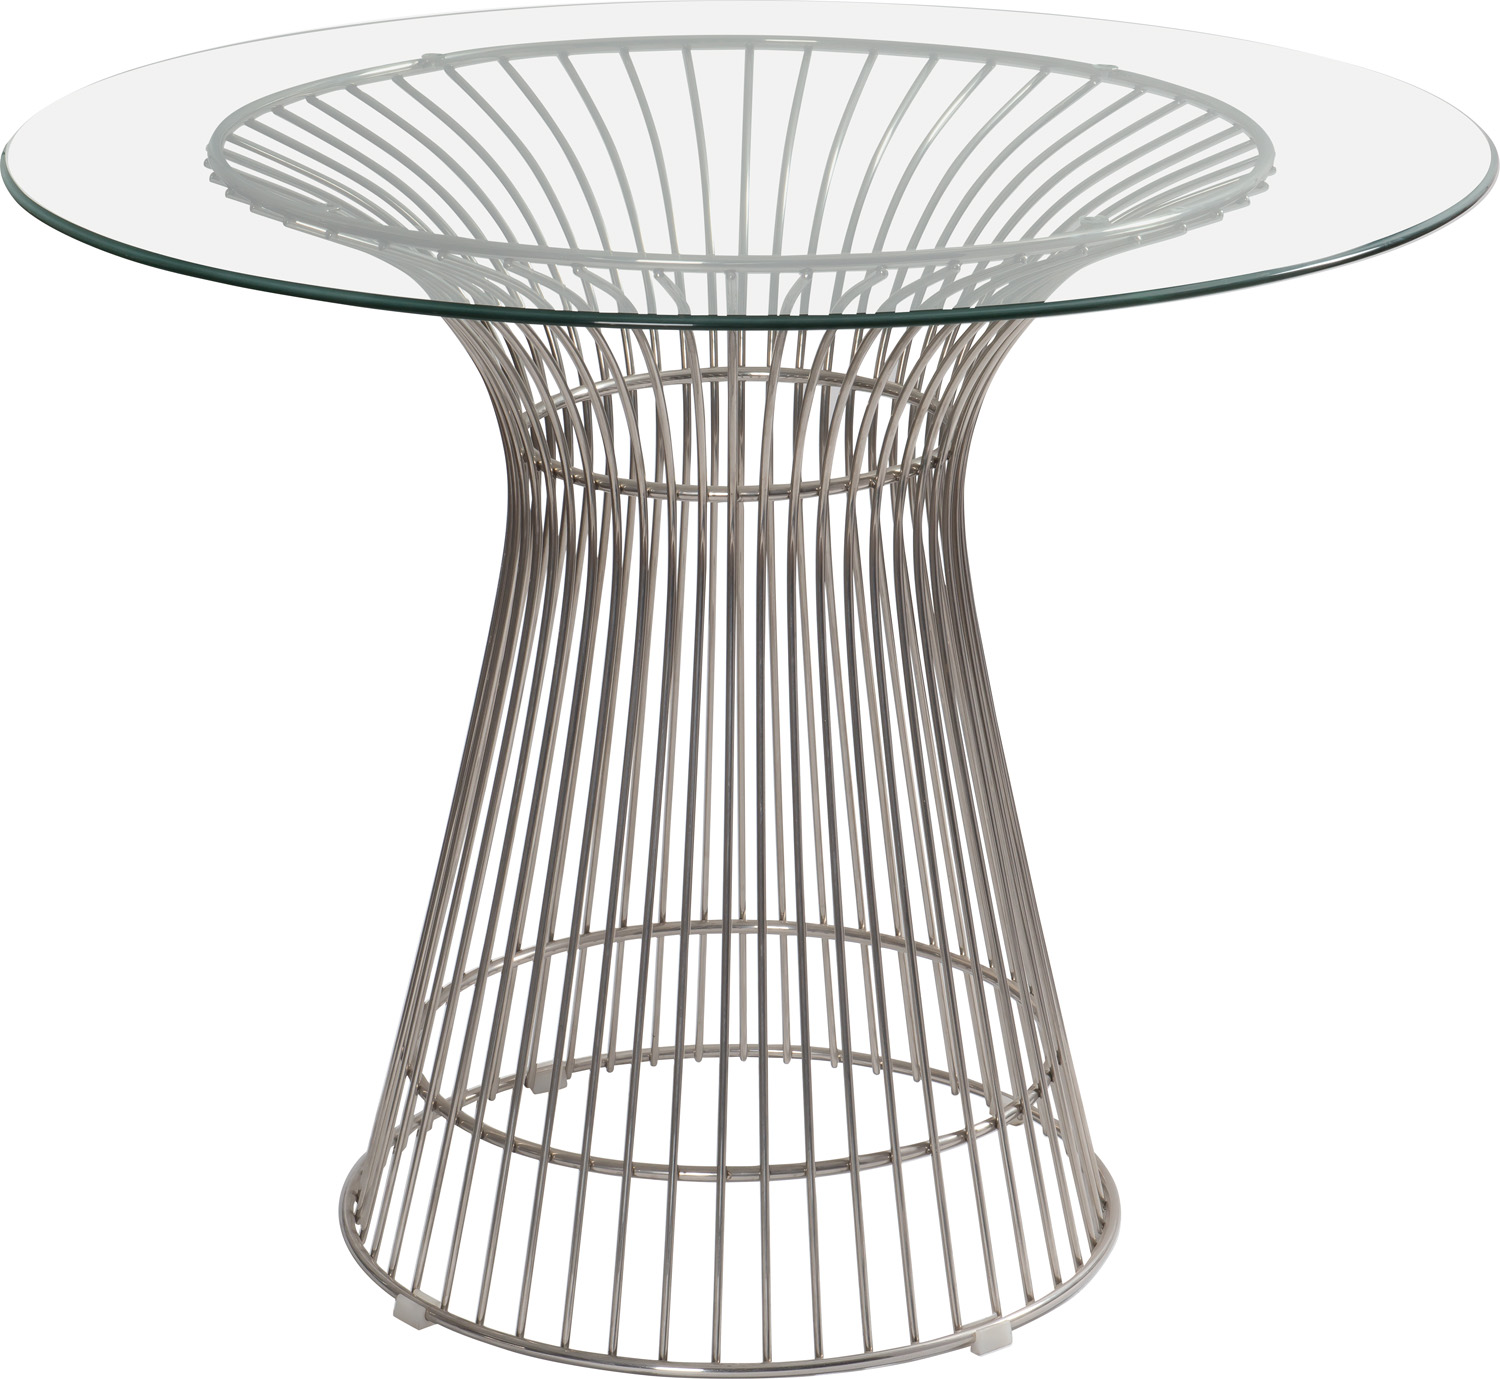 JS-2101 metal wire dining